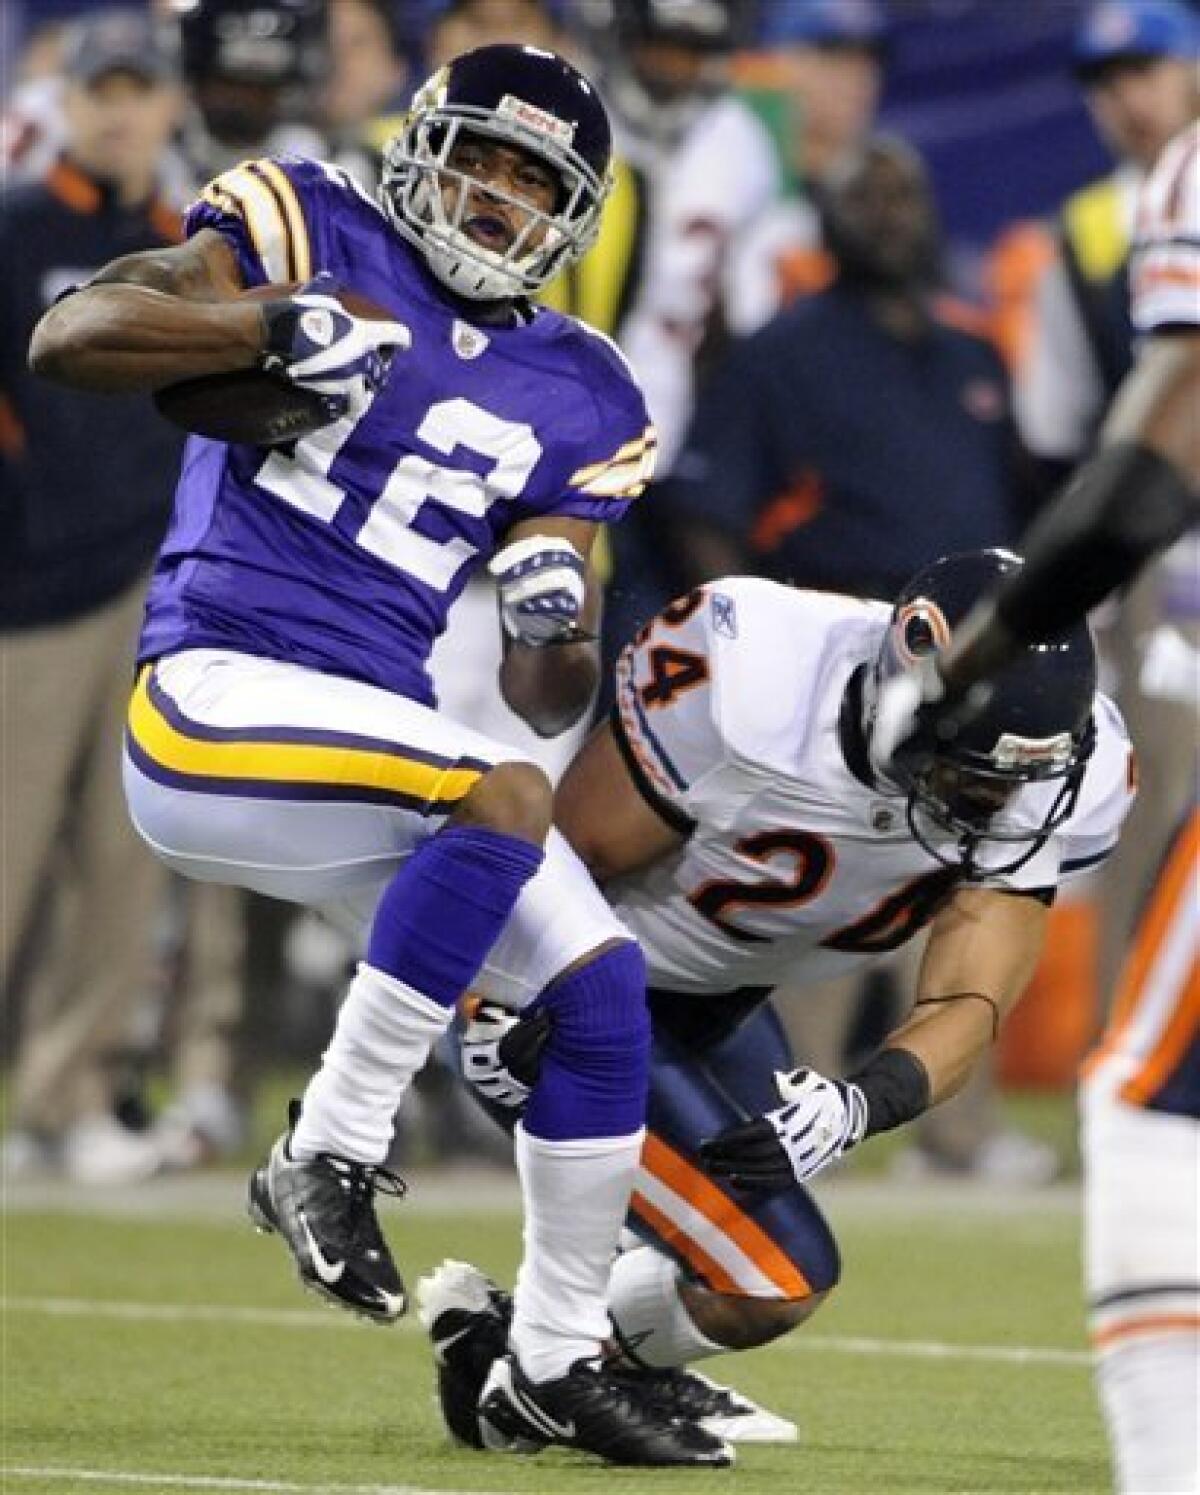 Favre leads Vikings past Cutler, Bears 36-10 - The San Diego Union